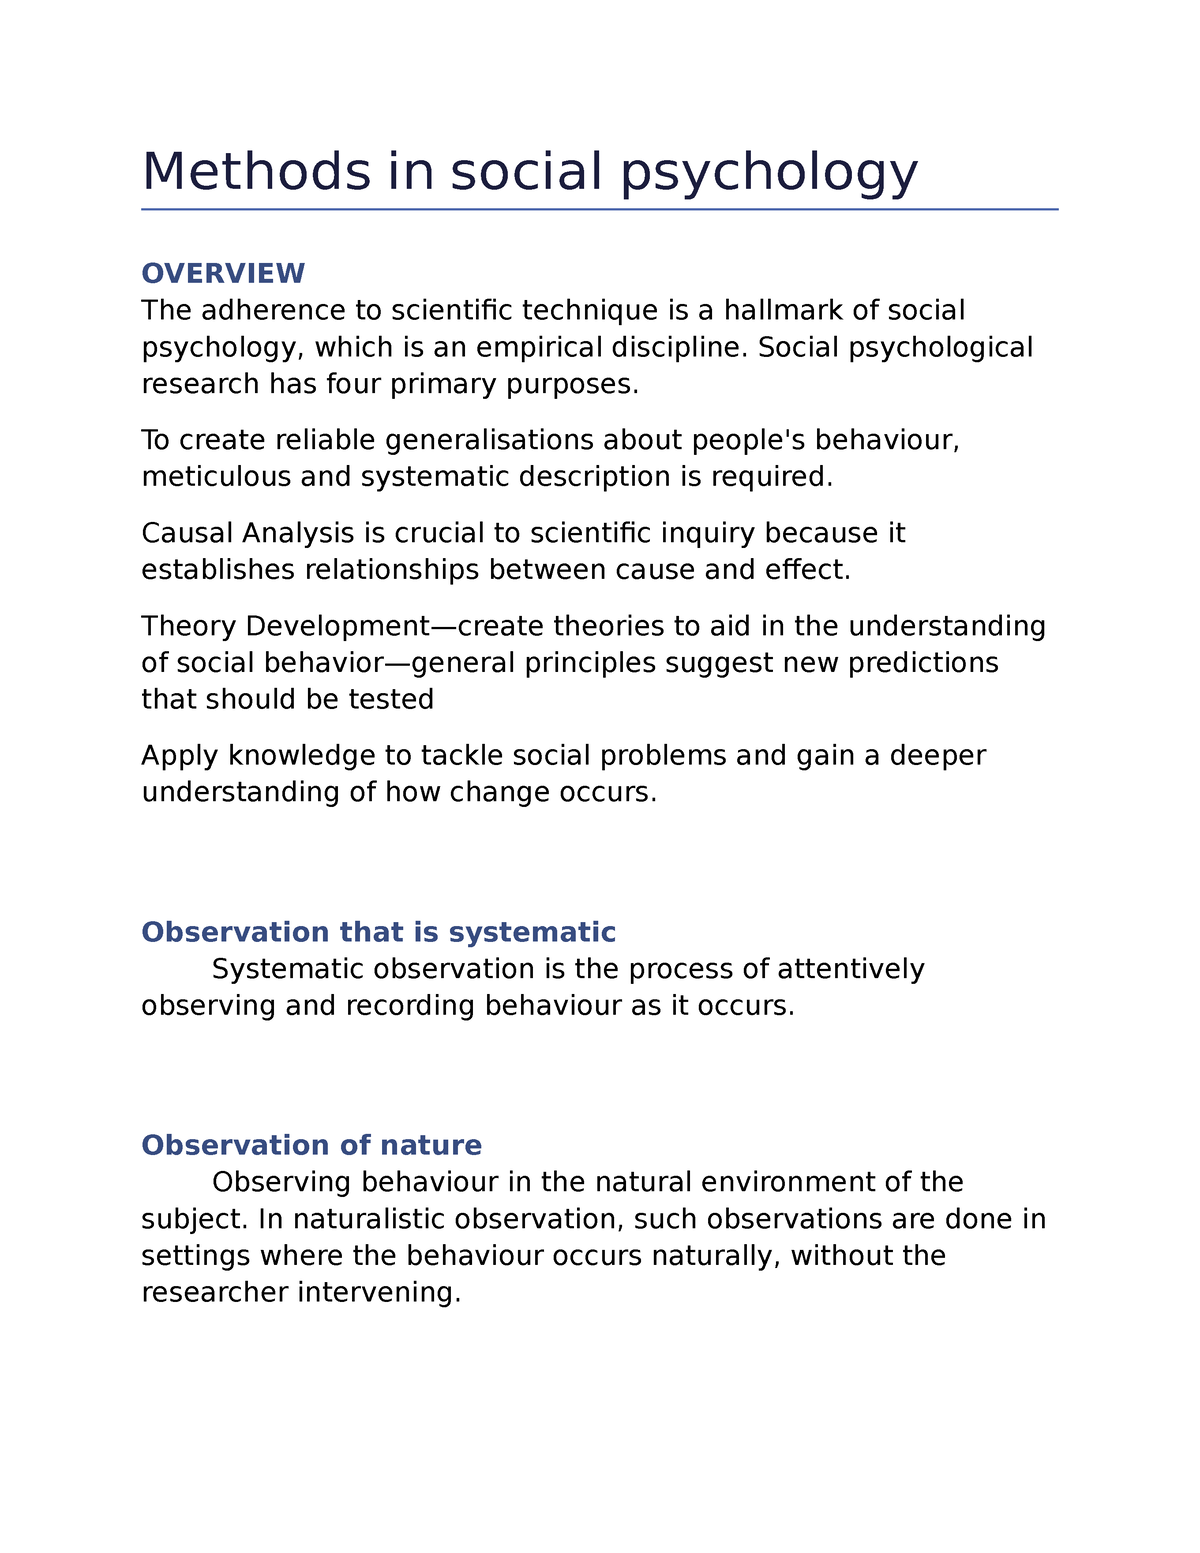 phd thesis in social psychology